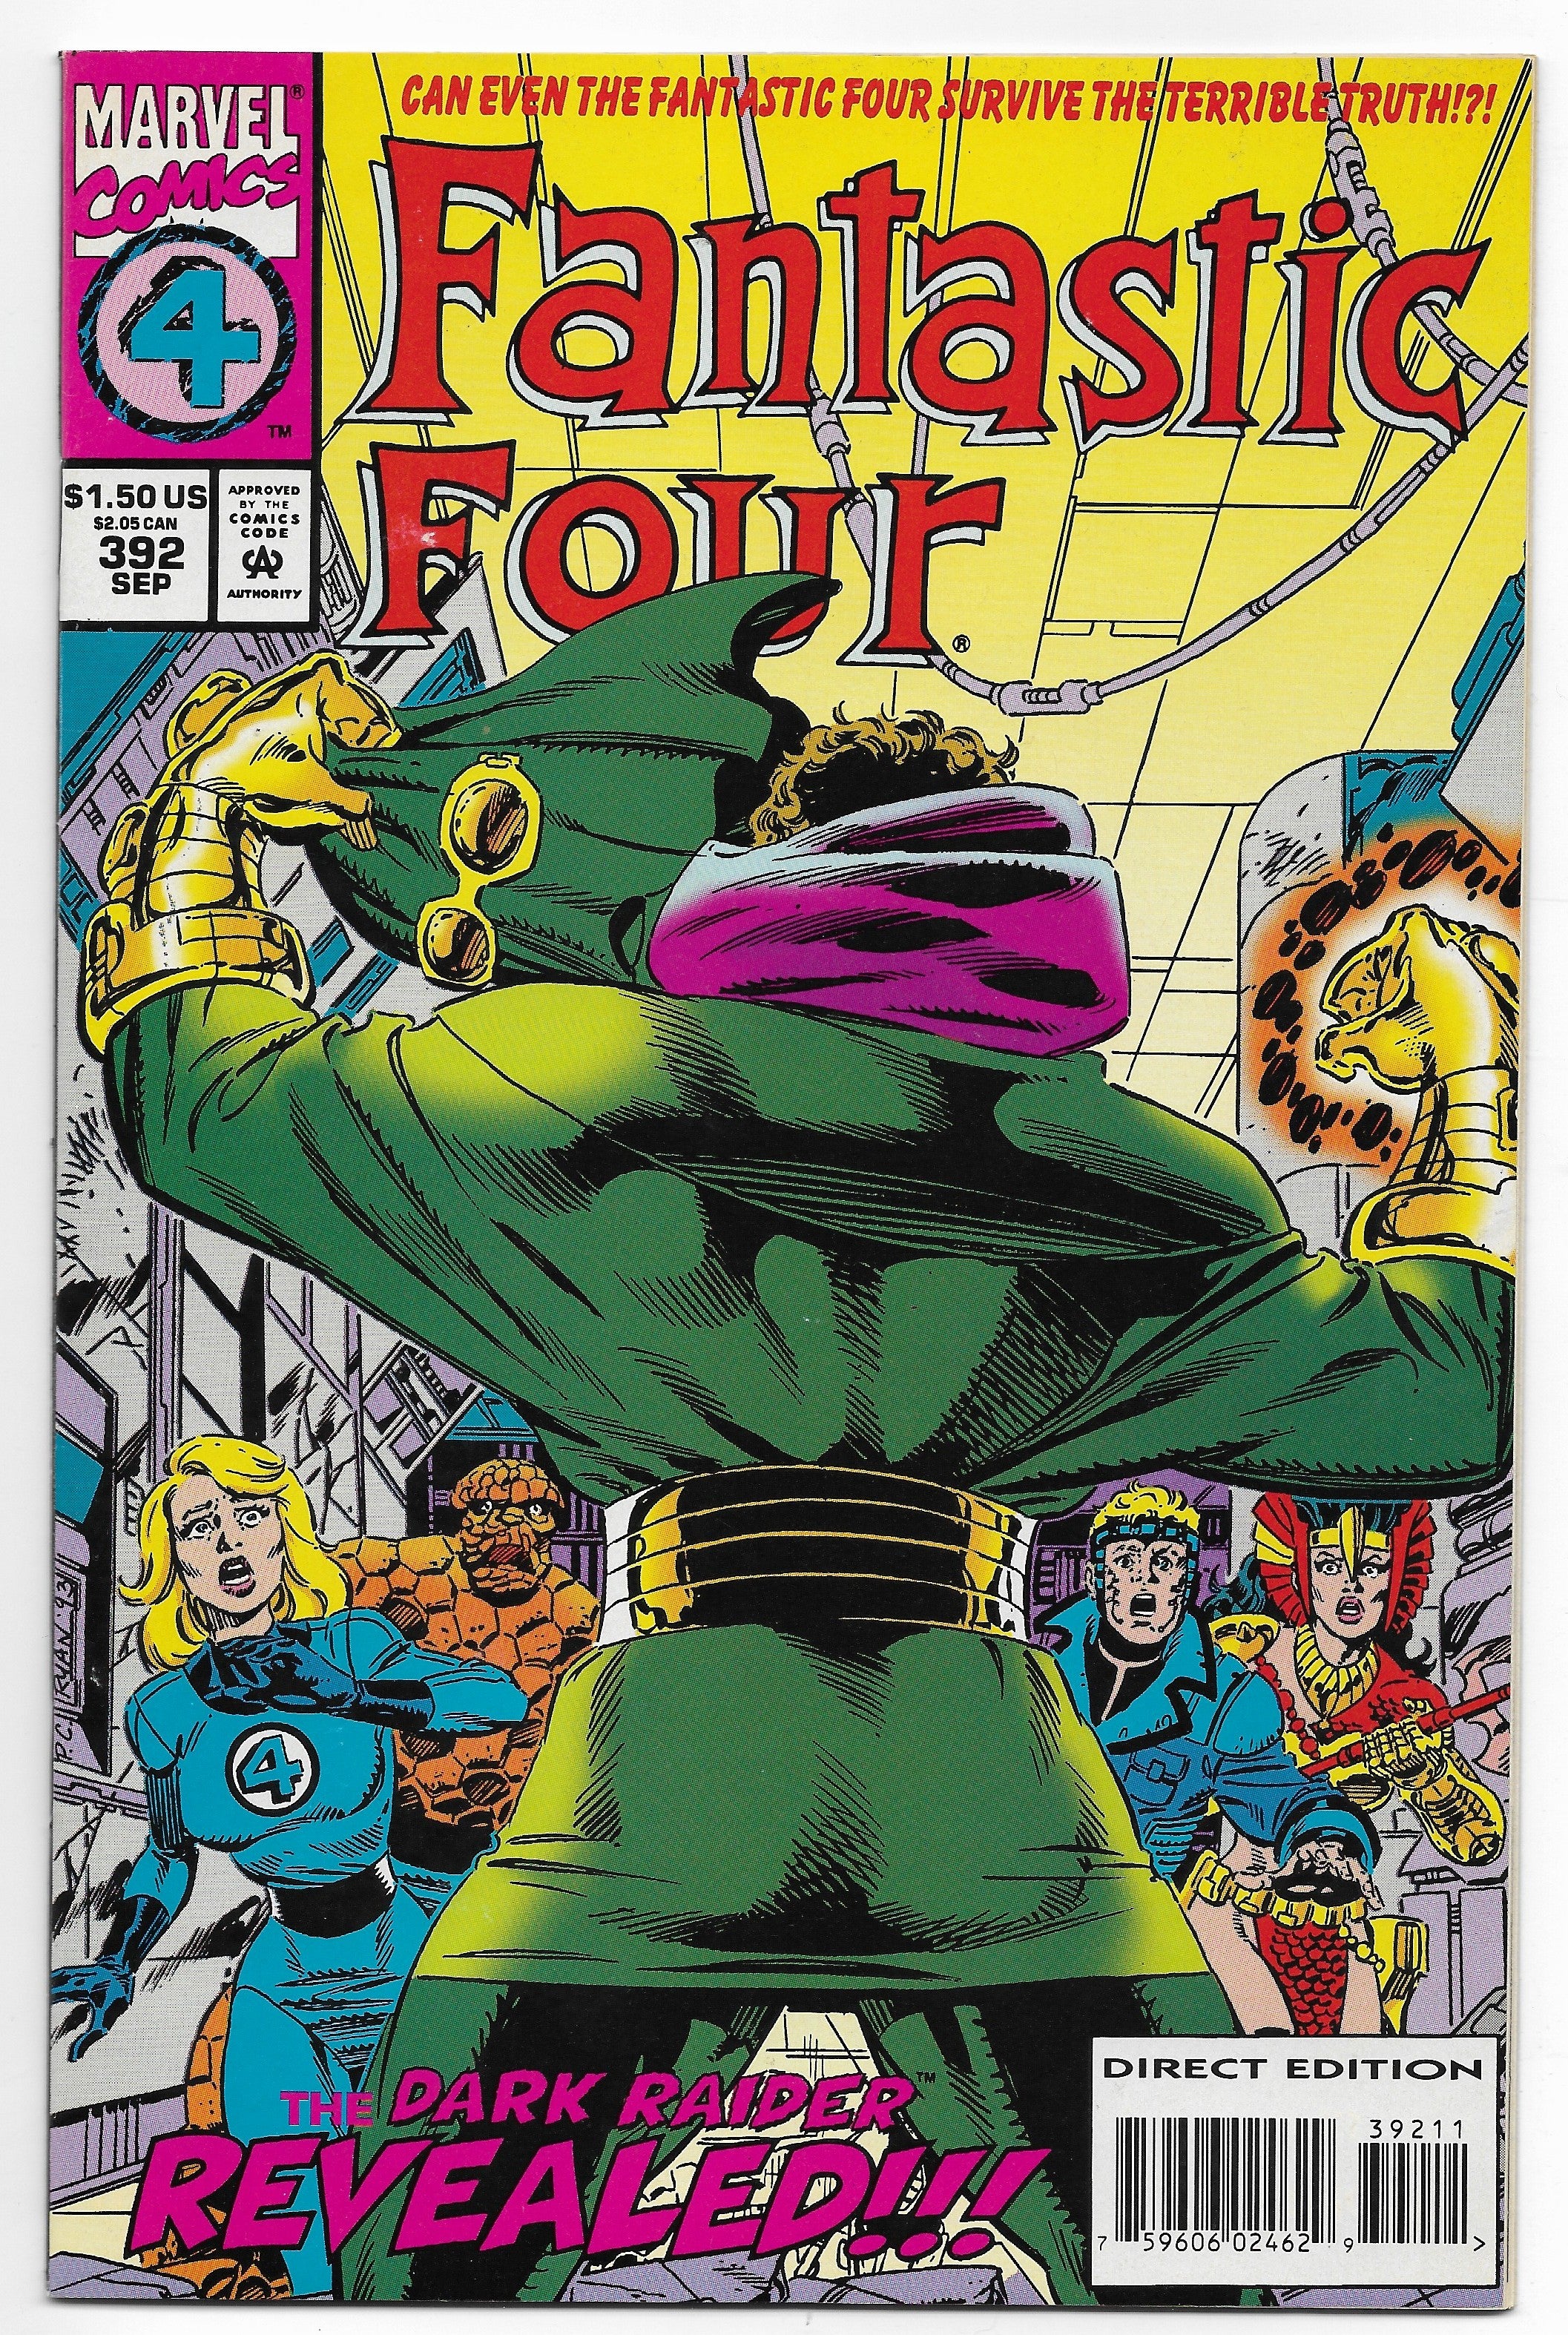 Photo of VF+ Fantastic Four V1 (94) 392A Direct Edition Tom DeFalco, Paul Ryan, Danny Bulanadi Comic sold by Stronghold Collectibles